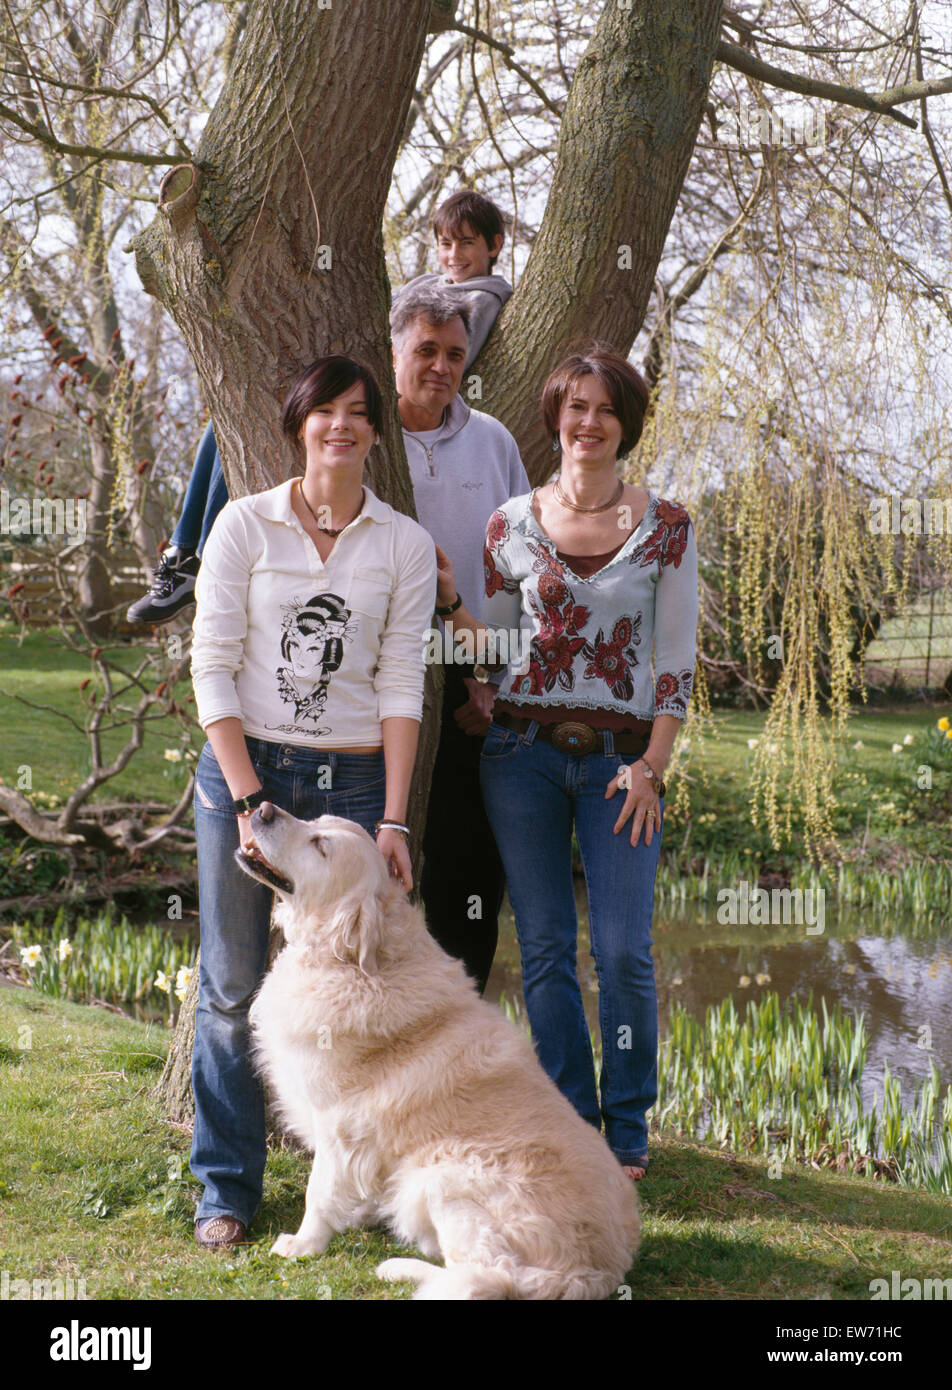 Portrait of family with golden retriever dog standing in country garden          FOR EDITORIAL USE ONLY Stock Photo